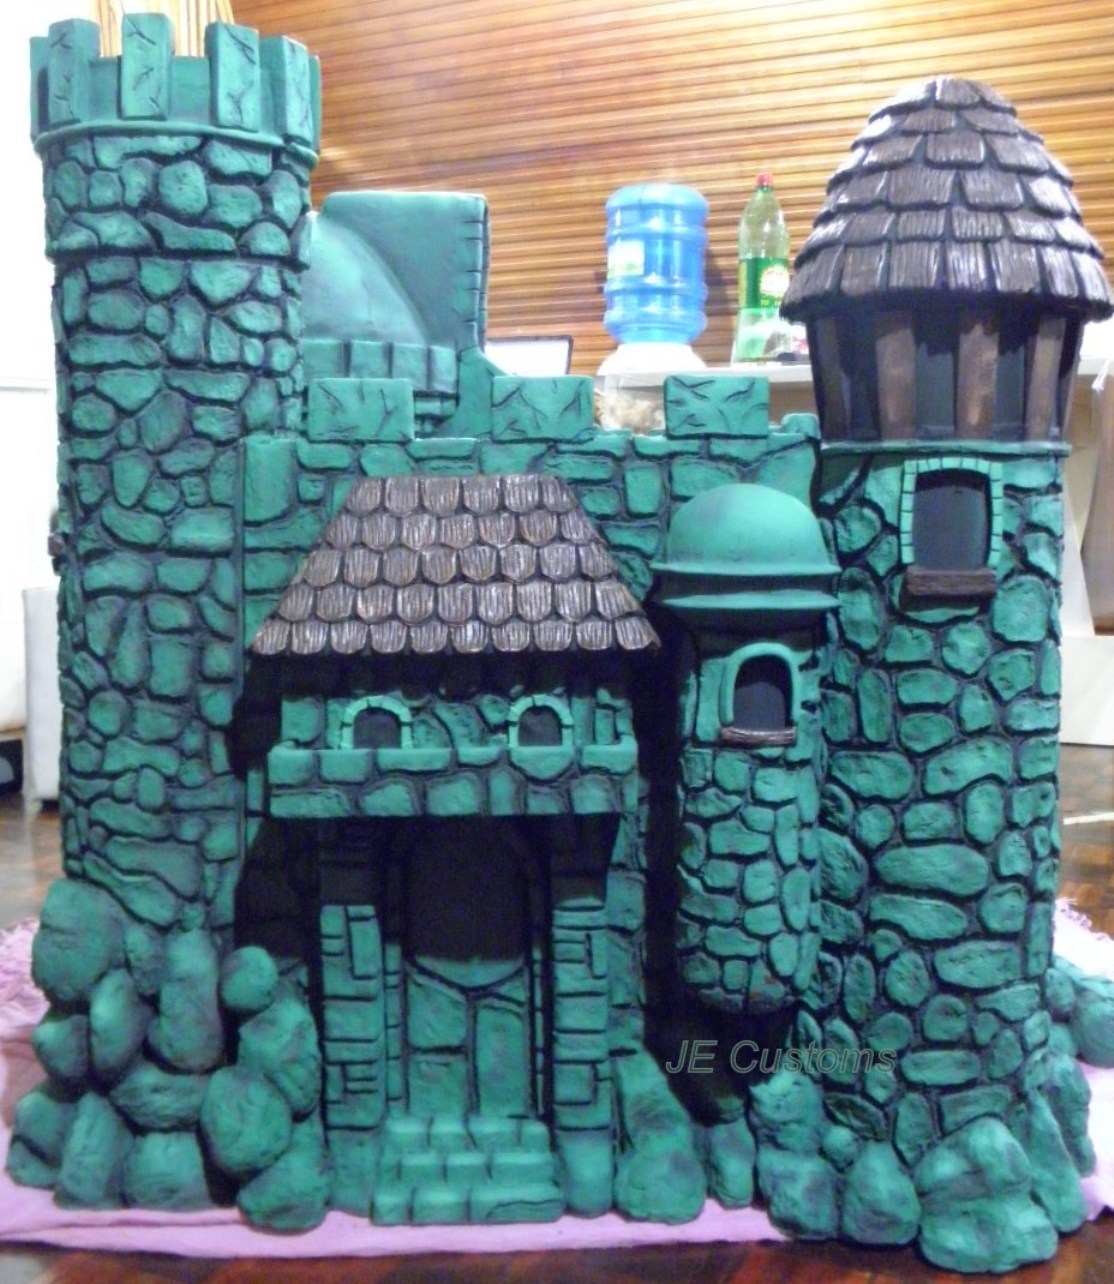 Here's the Castle Grayskull You Wish You Could Buy - ActionFigurePics.com